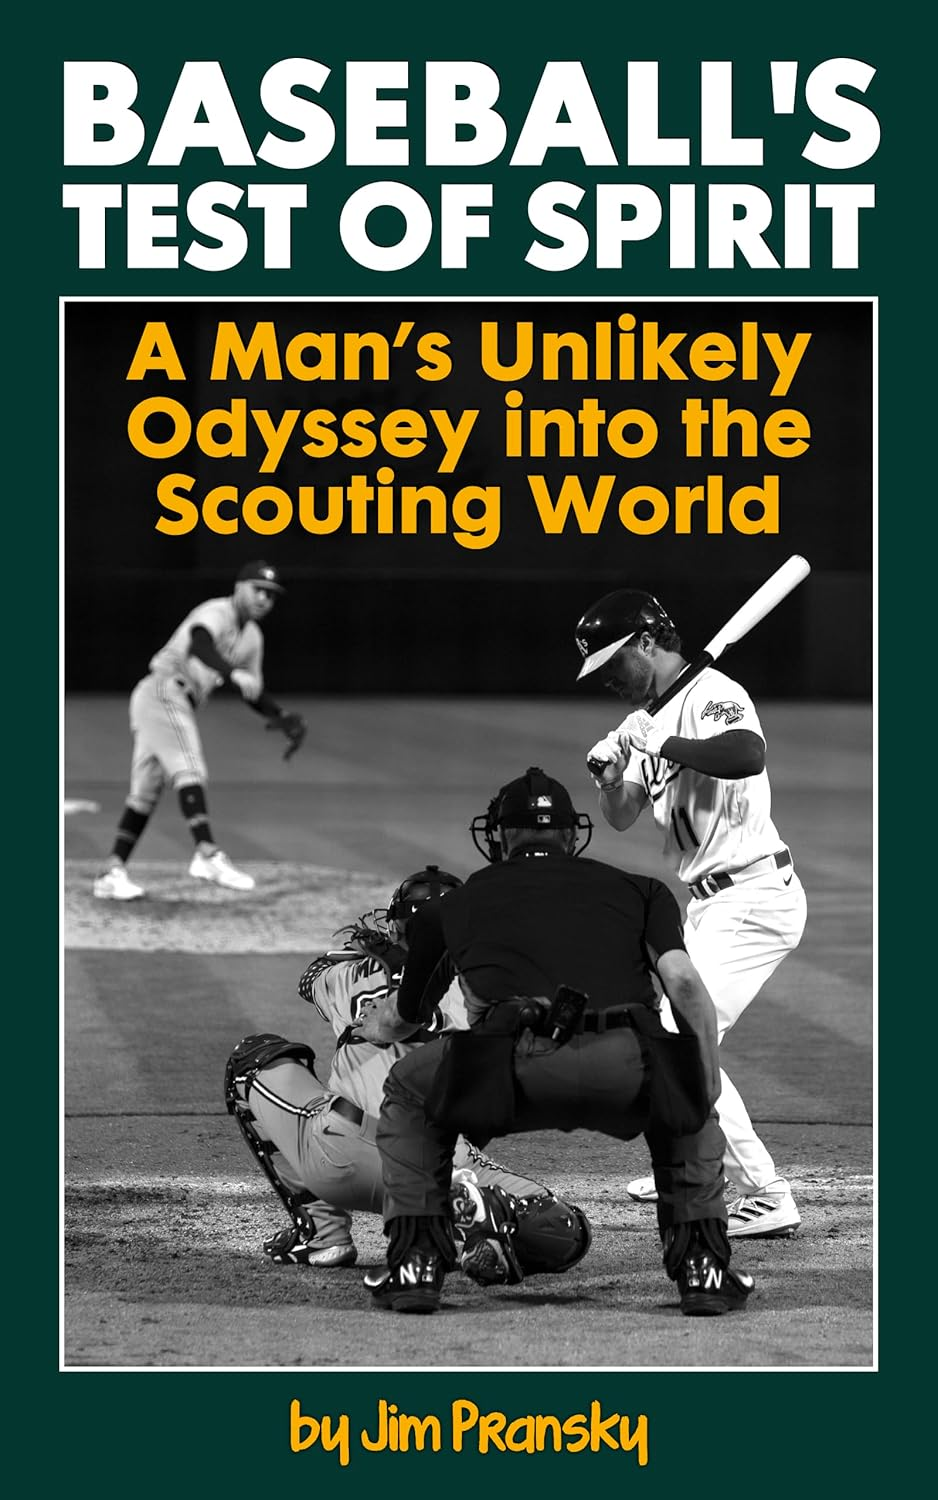 Crim: Former QU baseball coach publishes book about his quarter century as a scout for MLB teams